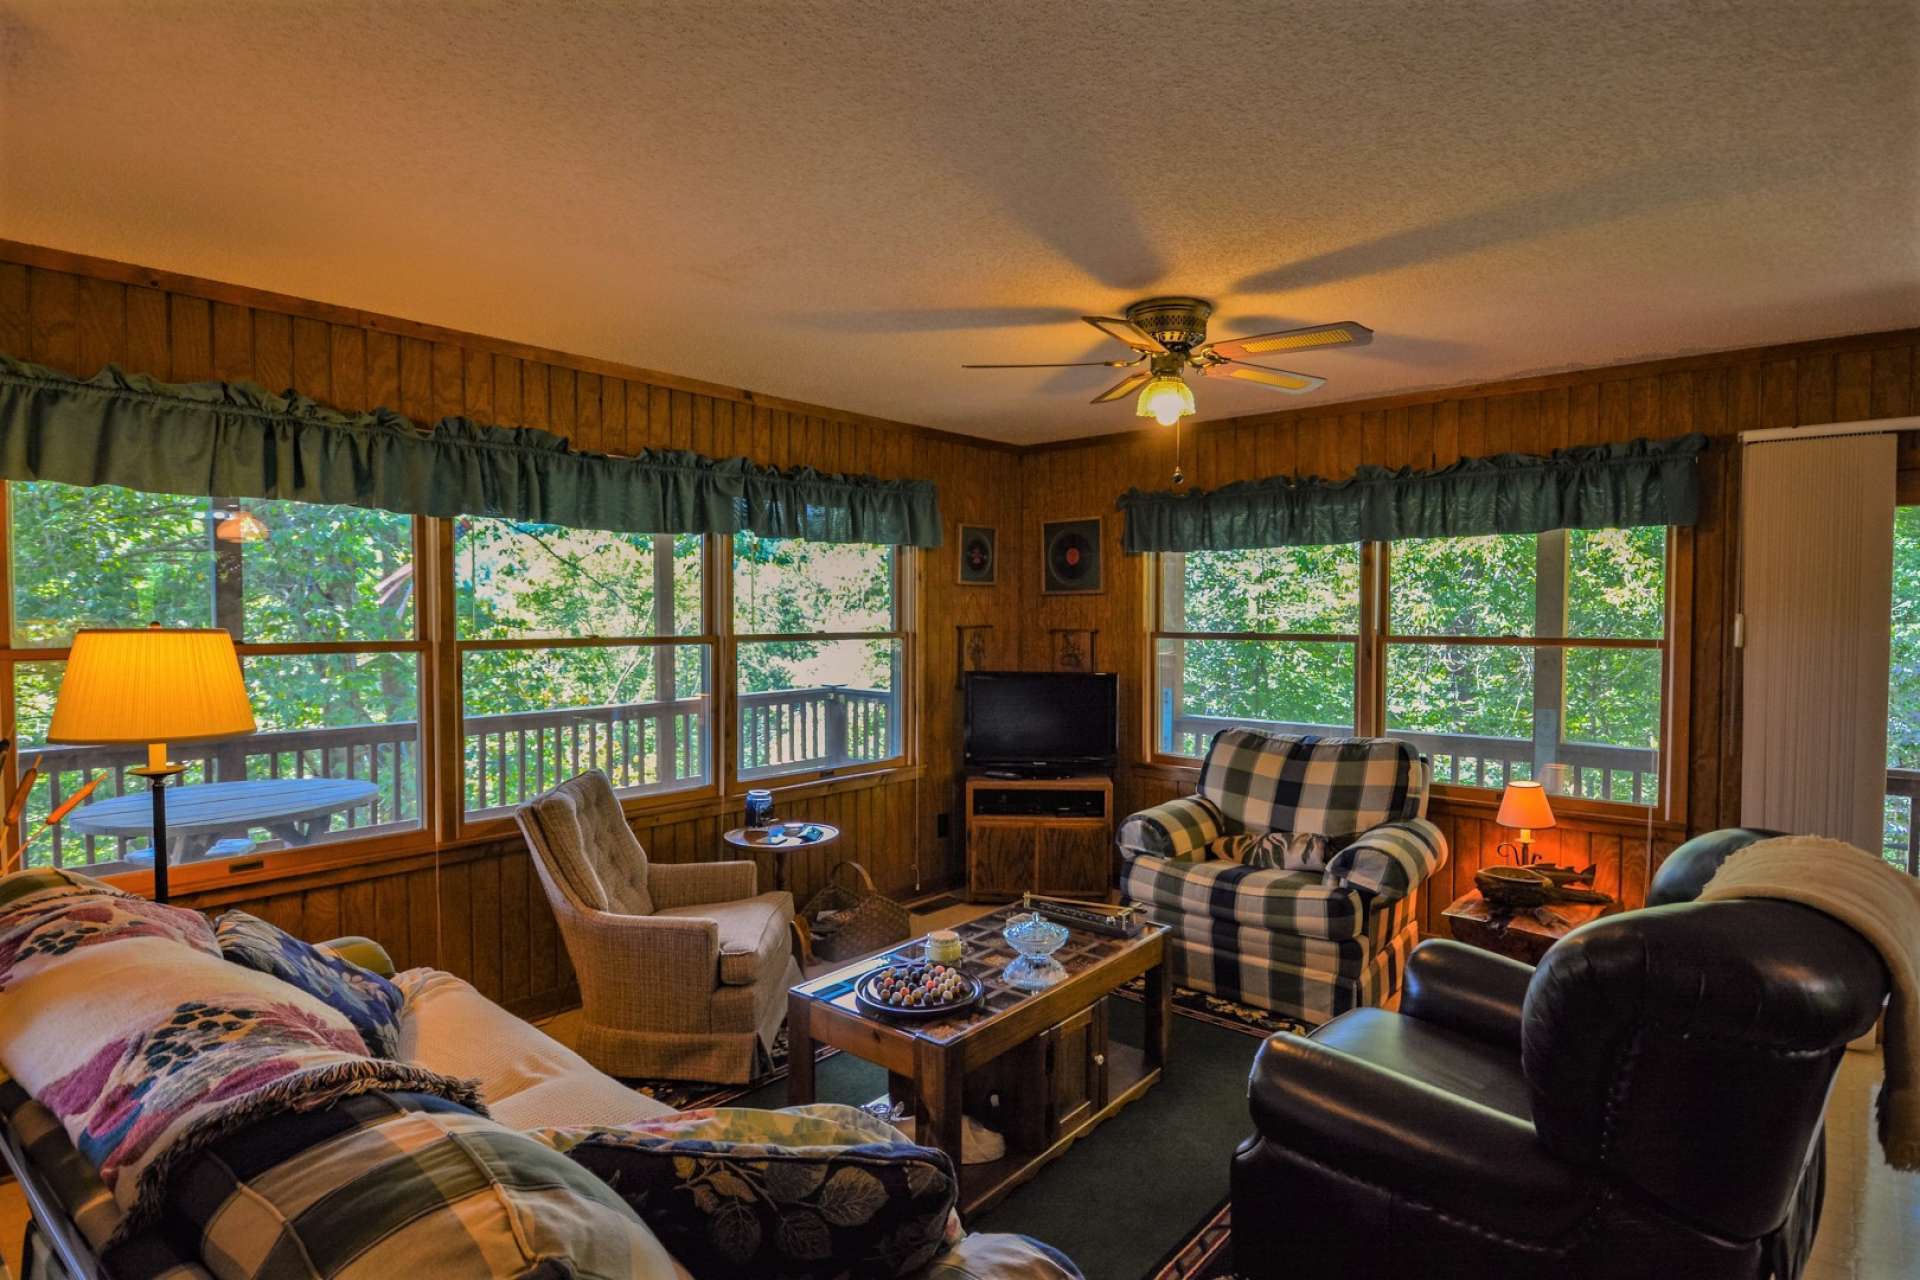 The living area provides lots of windows for natural light and allows you to enjoy the outdoor scenery through all four seasons in the NC High Country.